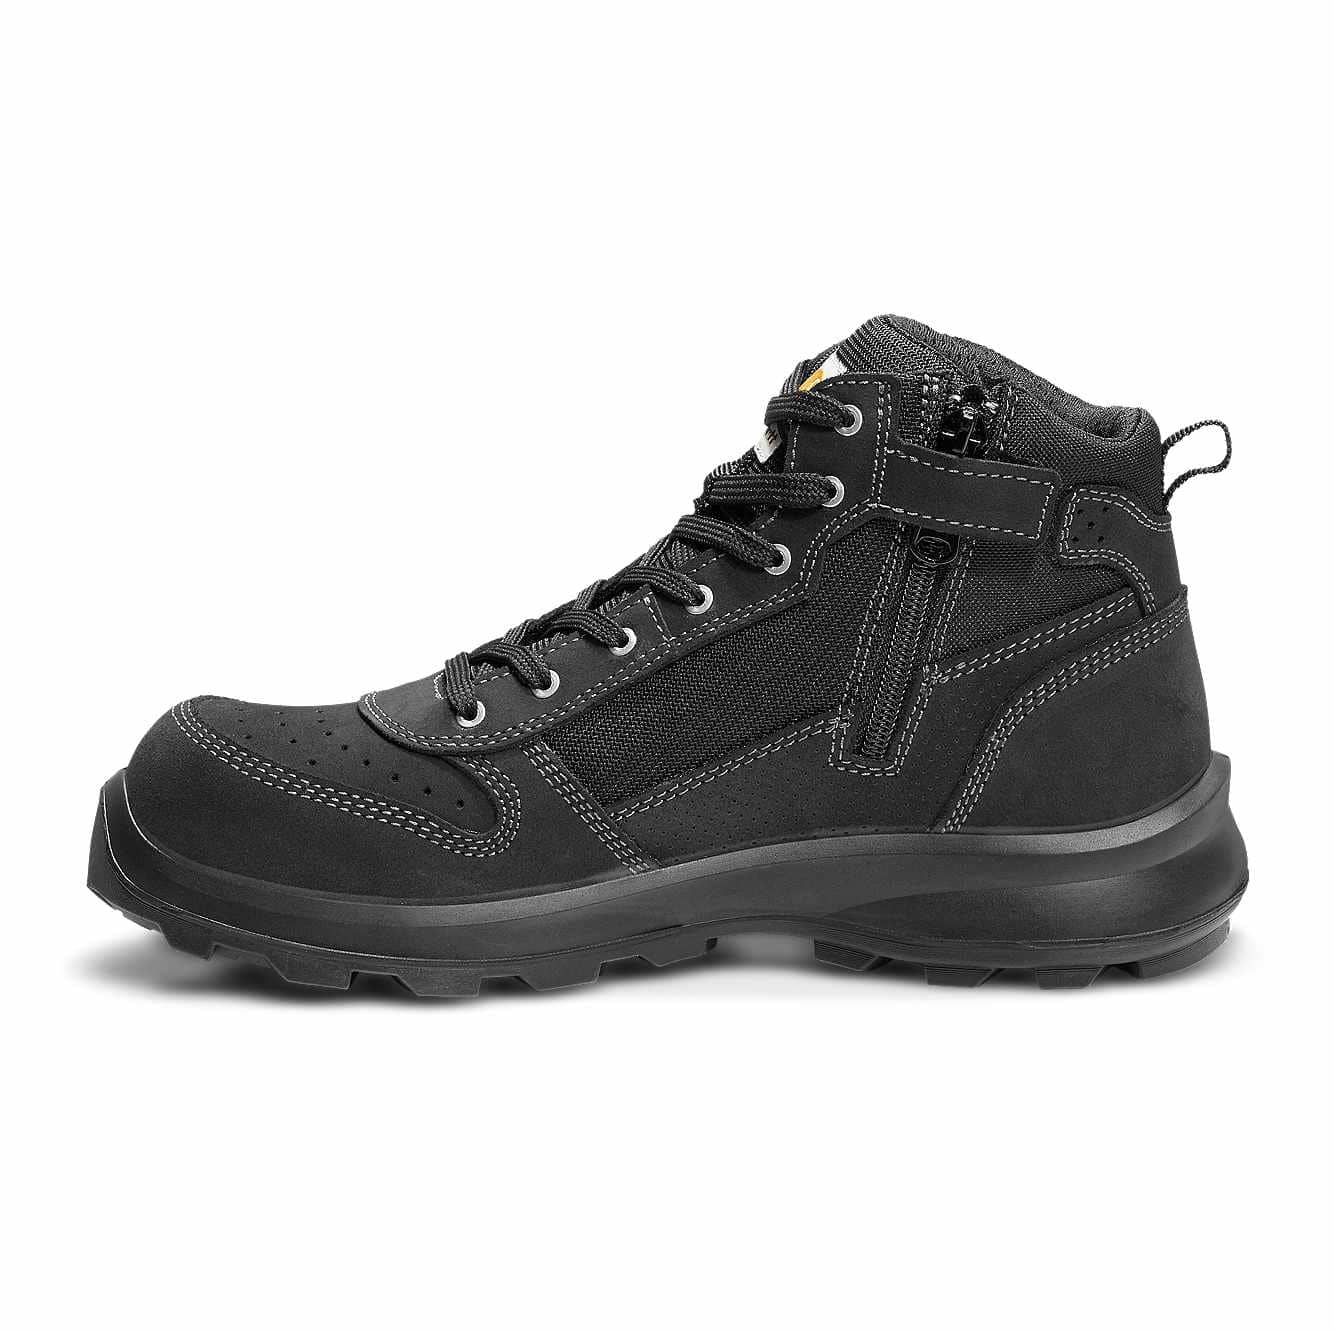 Picture of MICHIGAN RUGGED FLEX® S1P MIDCUT ZIP SAFETY SHOE